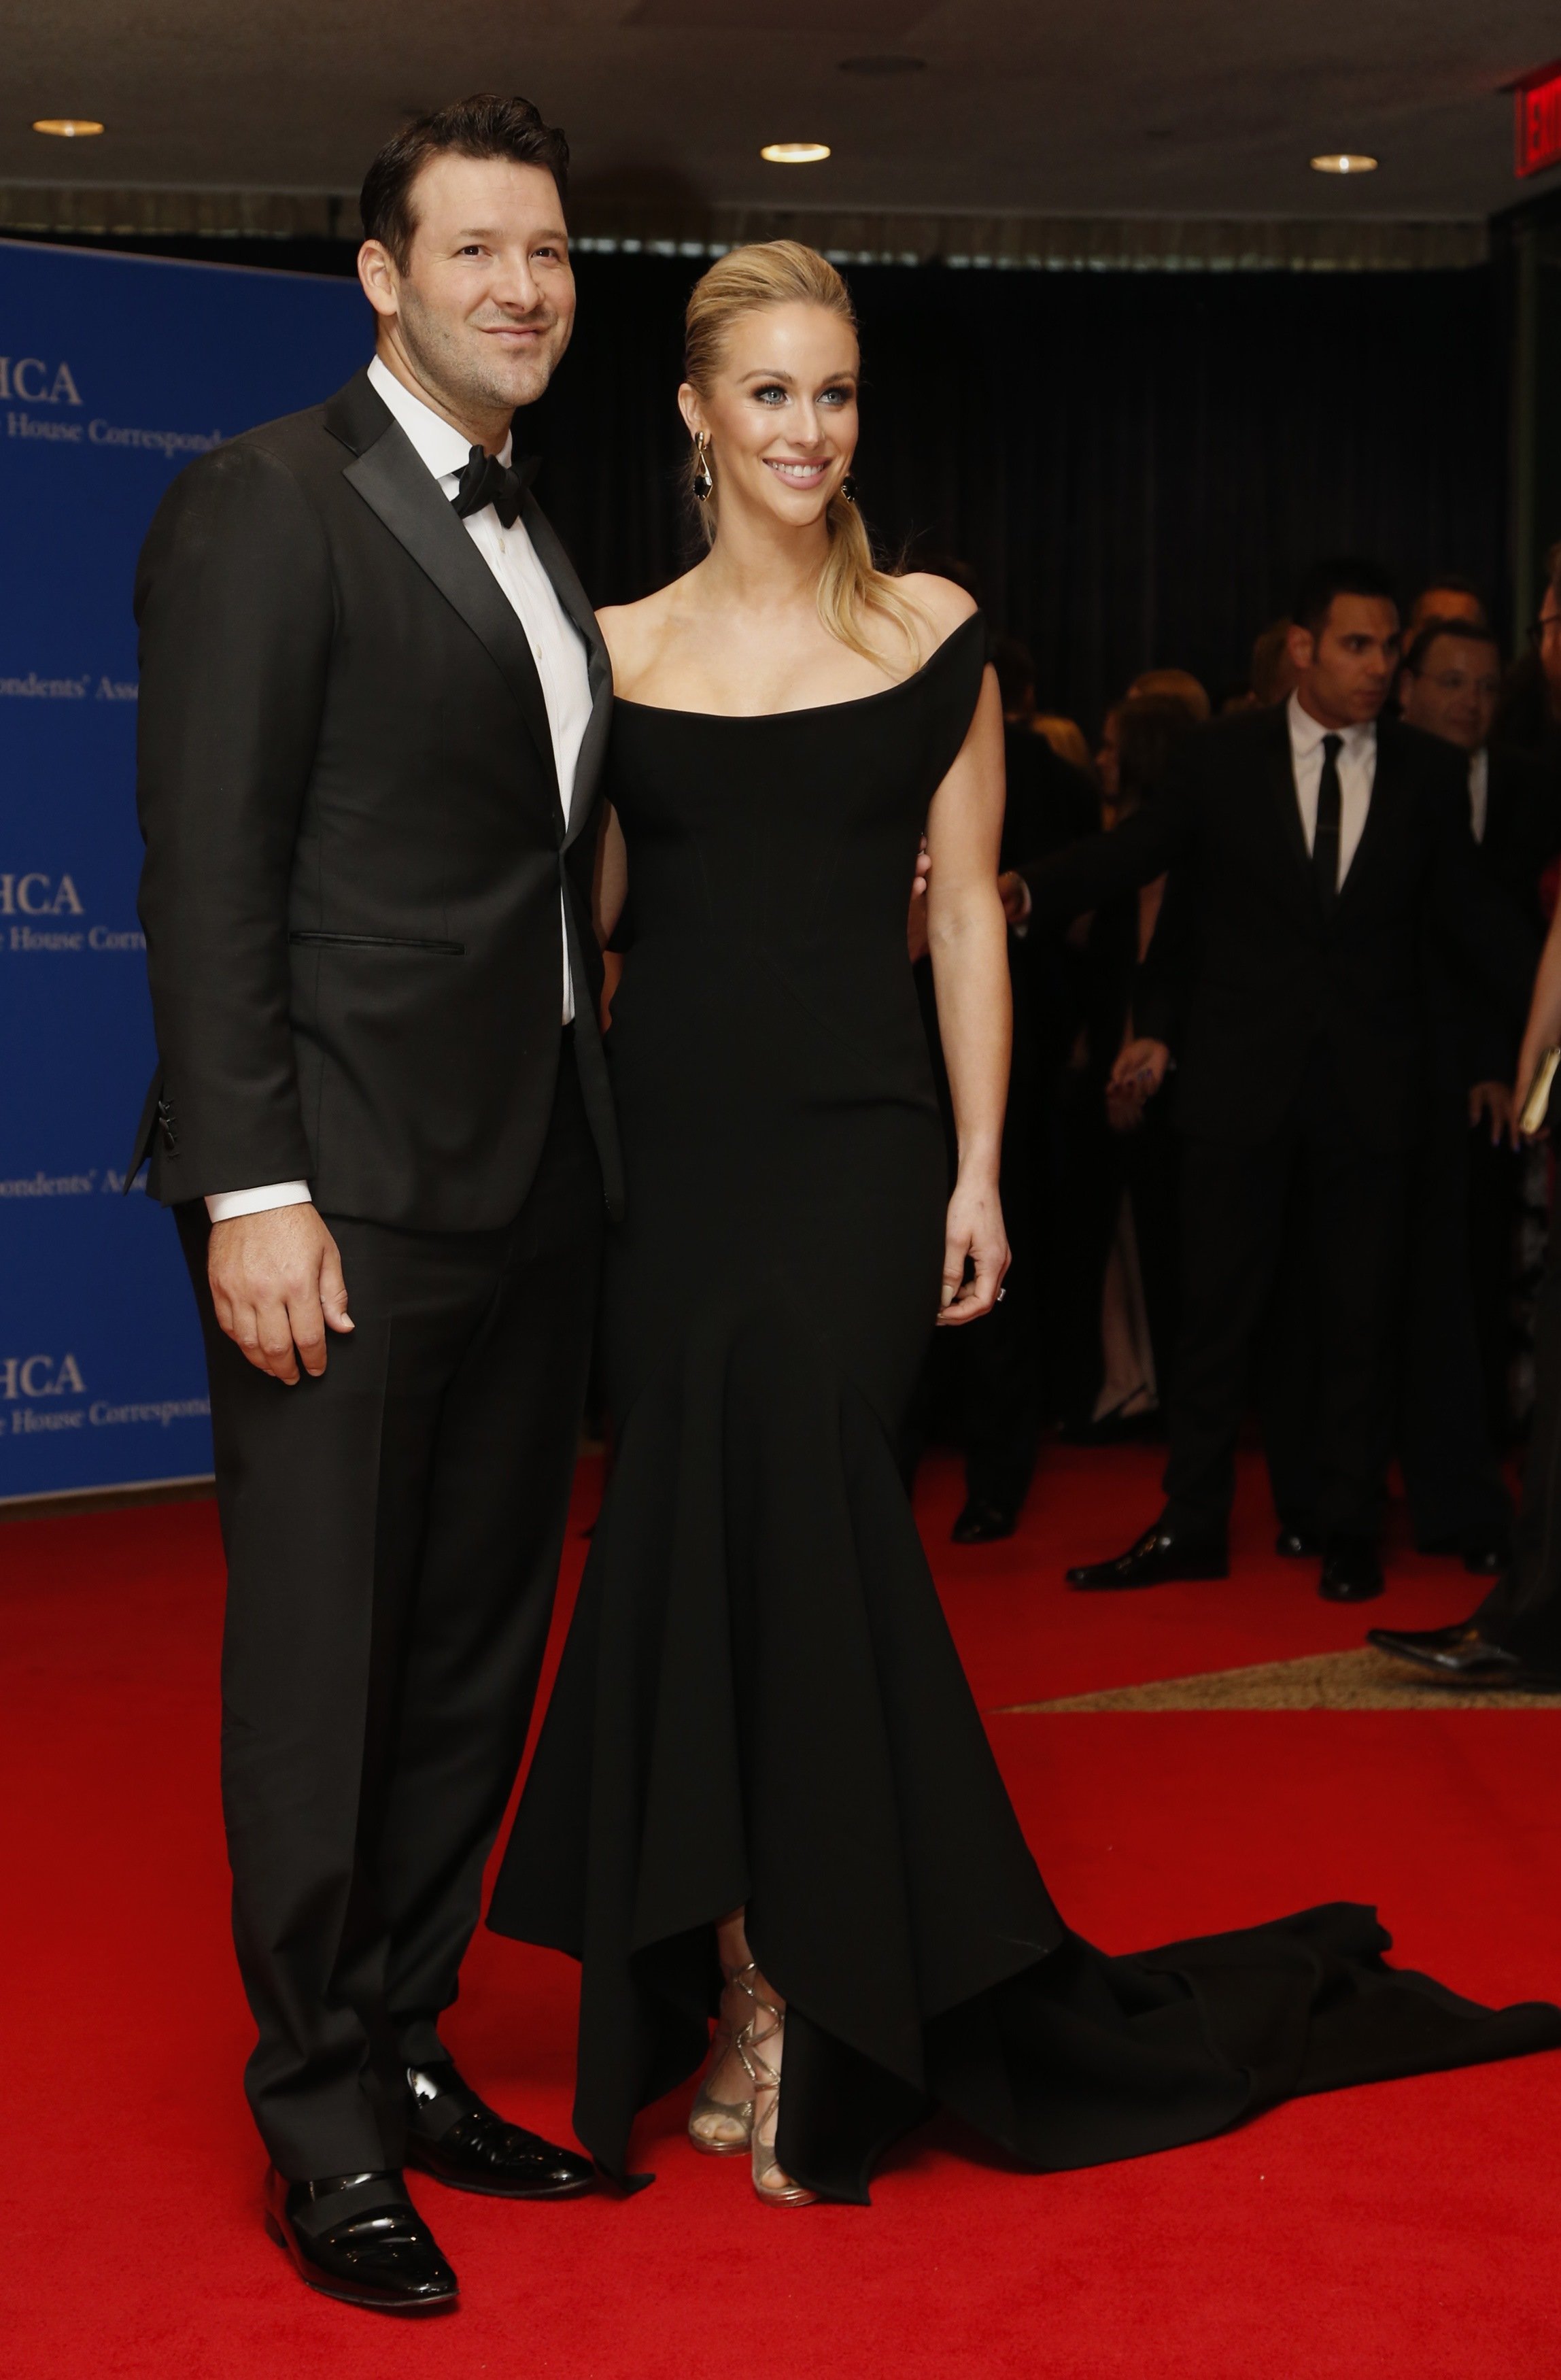 NFL football player Tony Romo and wife, Candice Crawford, arrive on the red carpet for the annual White House Correspondents Association Dinner in Washington